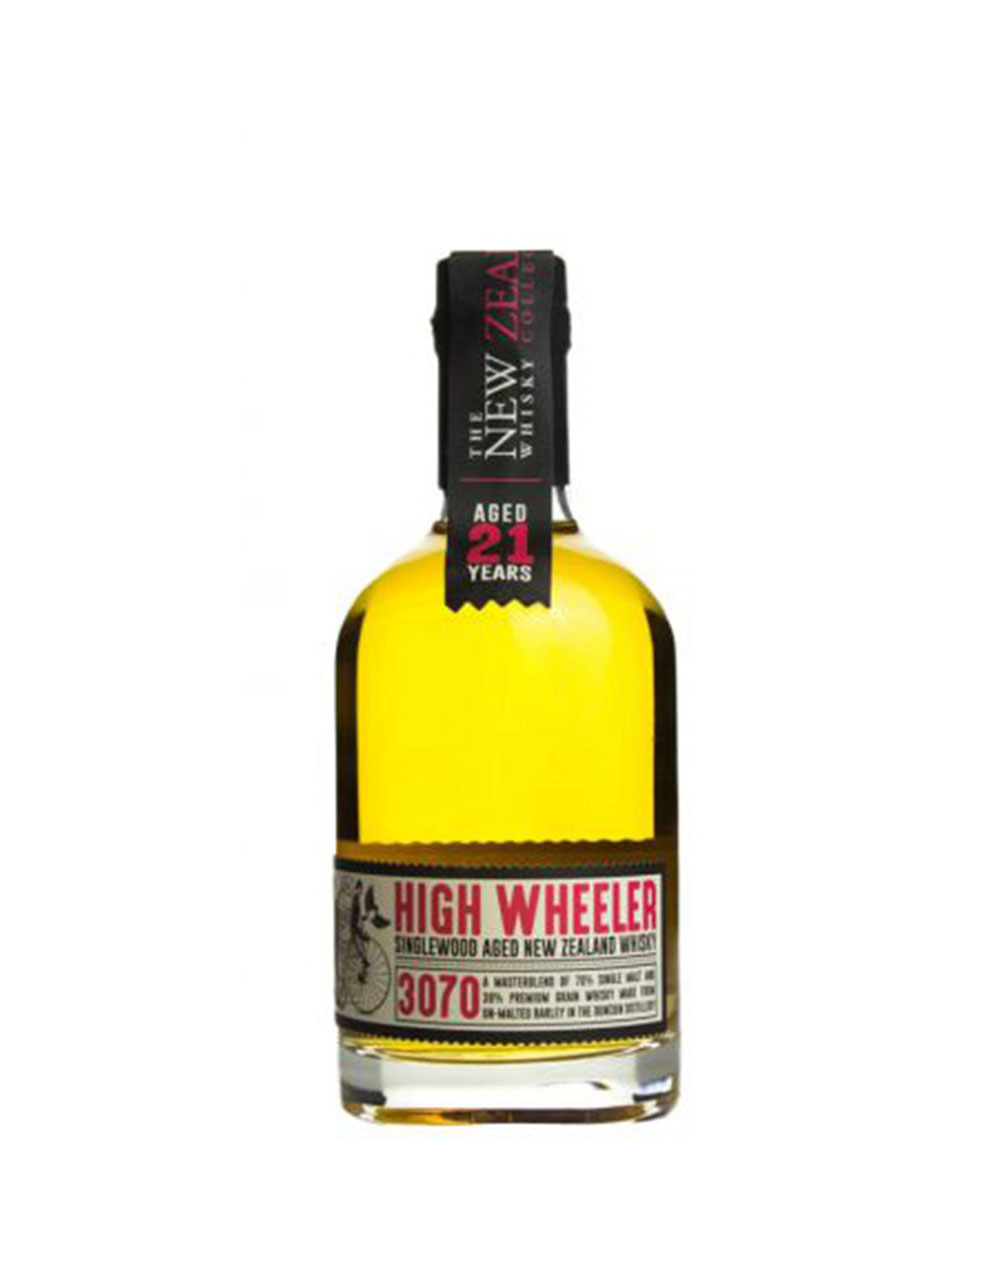 The New Zealand Whisky Collection 21 Year Old High Wheeler Whisky